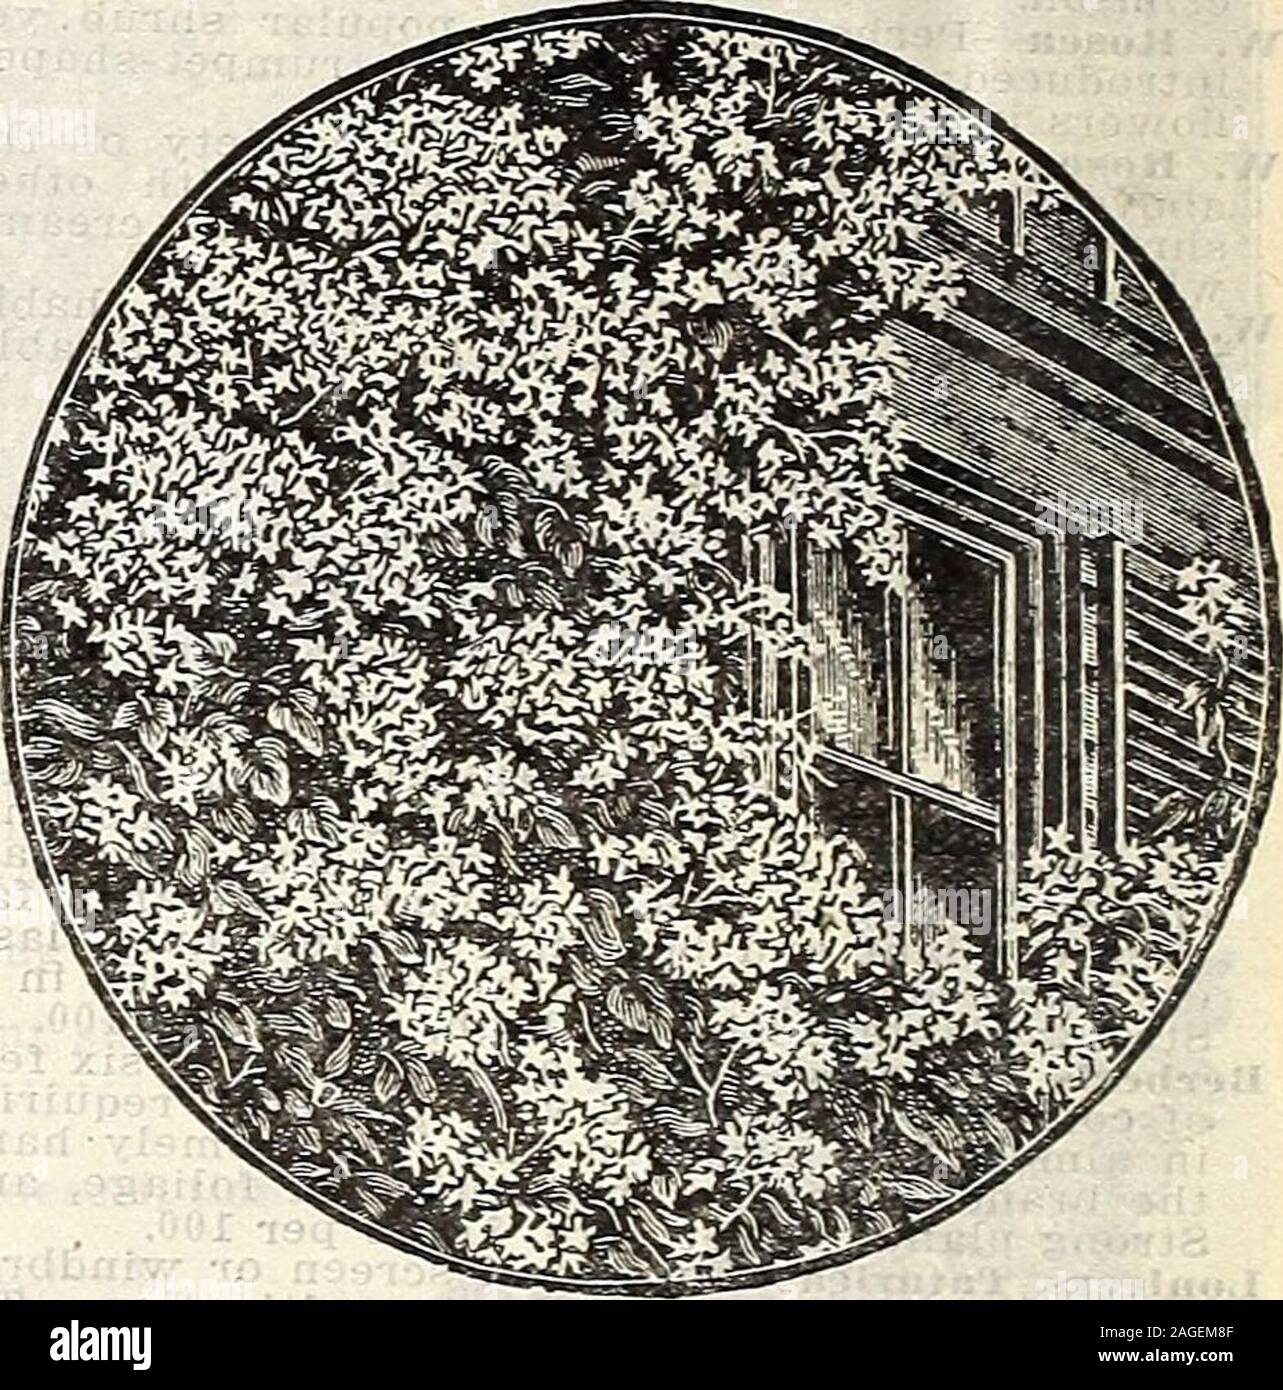 . Farm and garden annual : spring 1907. CLEMATIS PANICULATA. EVERLASTING SWEET PEA. Lathyrus Latifolius—One of the most useful, hardy climbing- plants, attaining- a height of about 10 feet. The pink, redand white flowers are freely produced on long- stems all sum-mer, and last well when cut. Each 25c; doz $2.50 HONEYSUCKLES. Aurea Reticulata—A variety with beautiful variegated foliage.Flowers yellow and fragrant • 25 Chinese T-wining—Well-kno-v^n vine, holding its foliage nearlyall winter. White flowers in July and September 30 Halleana (Halls Japan)—A strong, vigorous, fragrant variety,produc Stock Photo